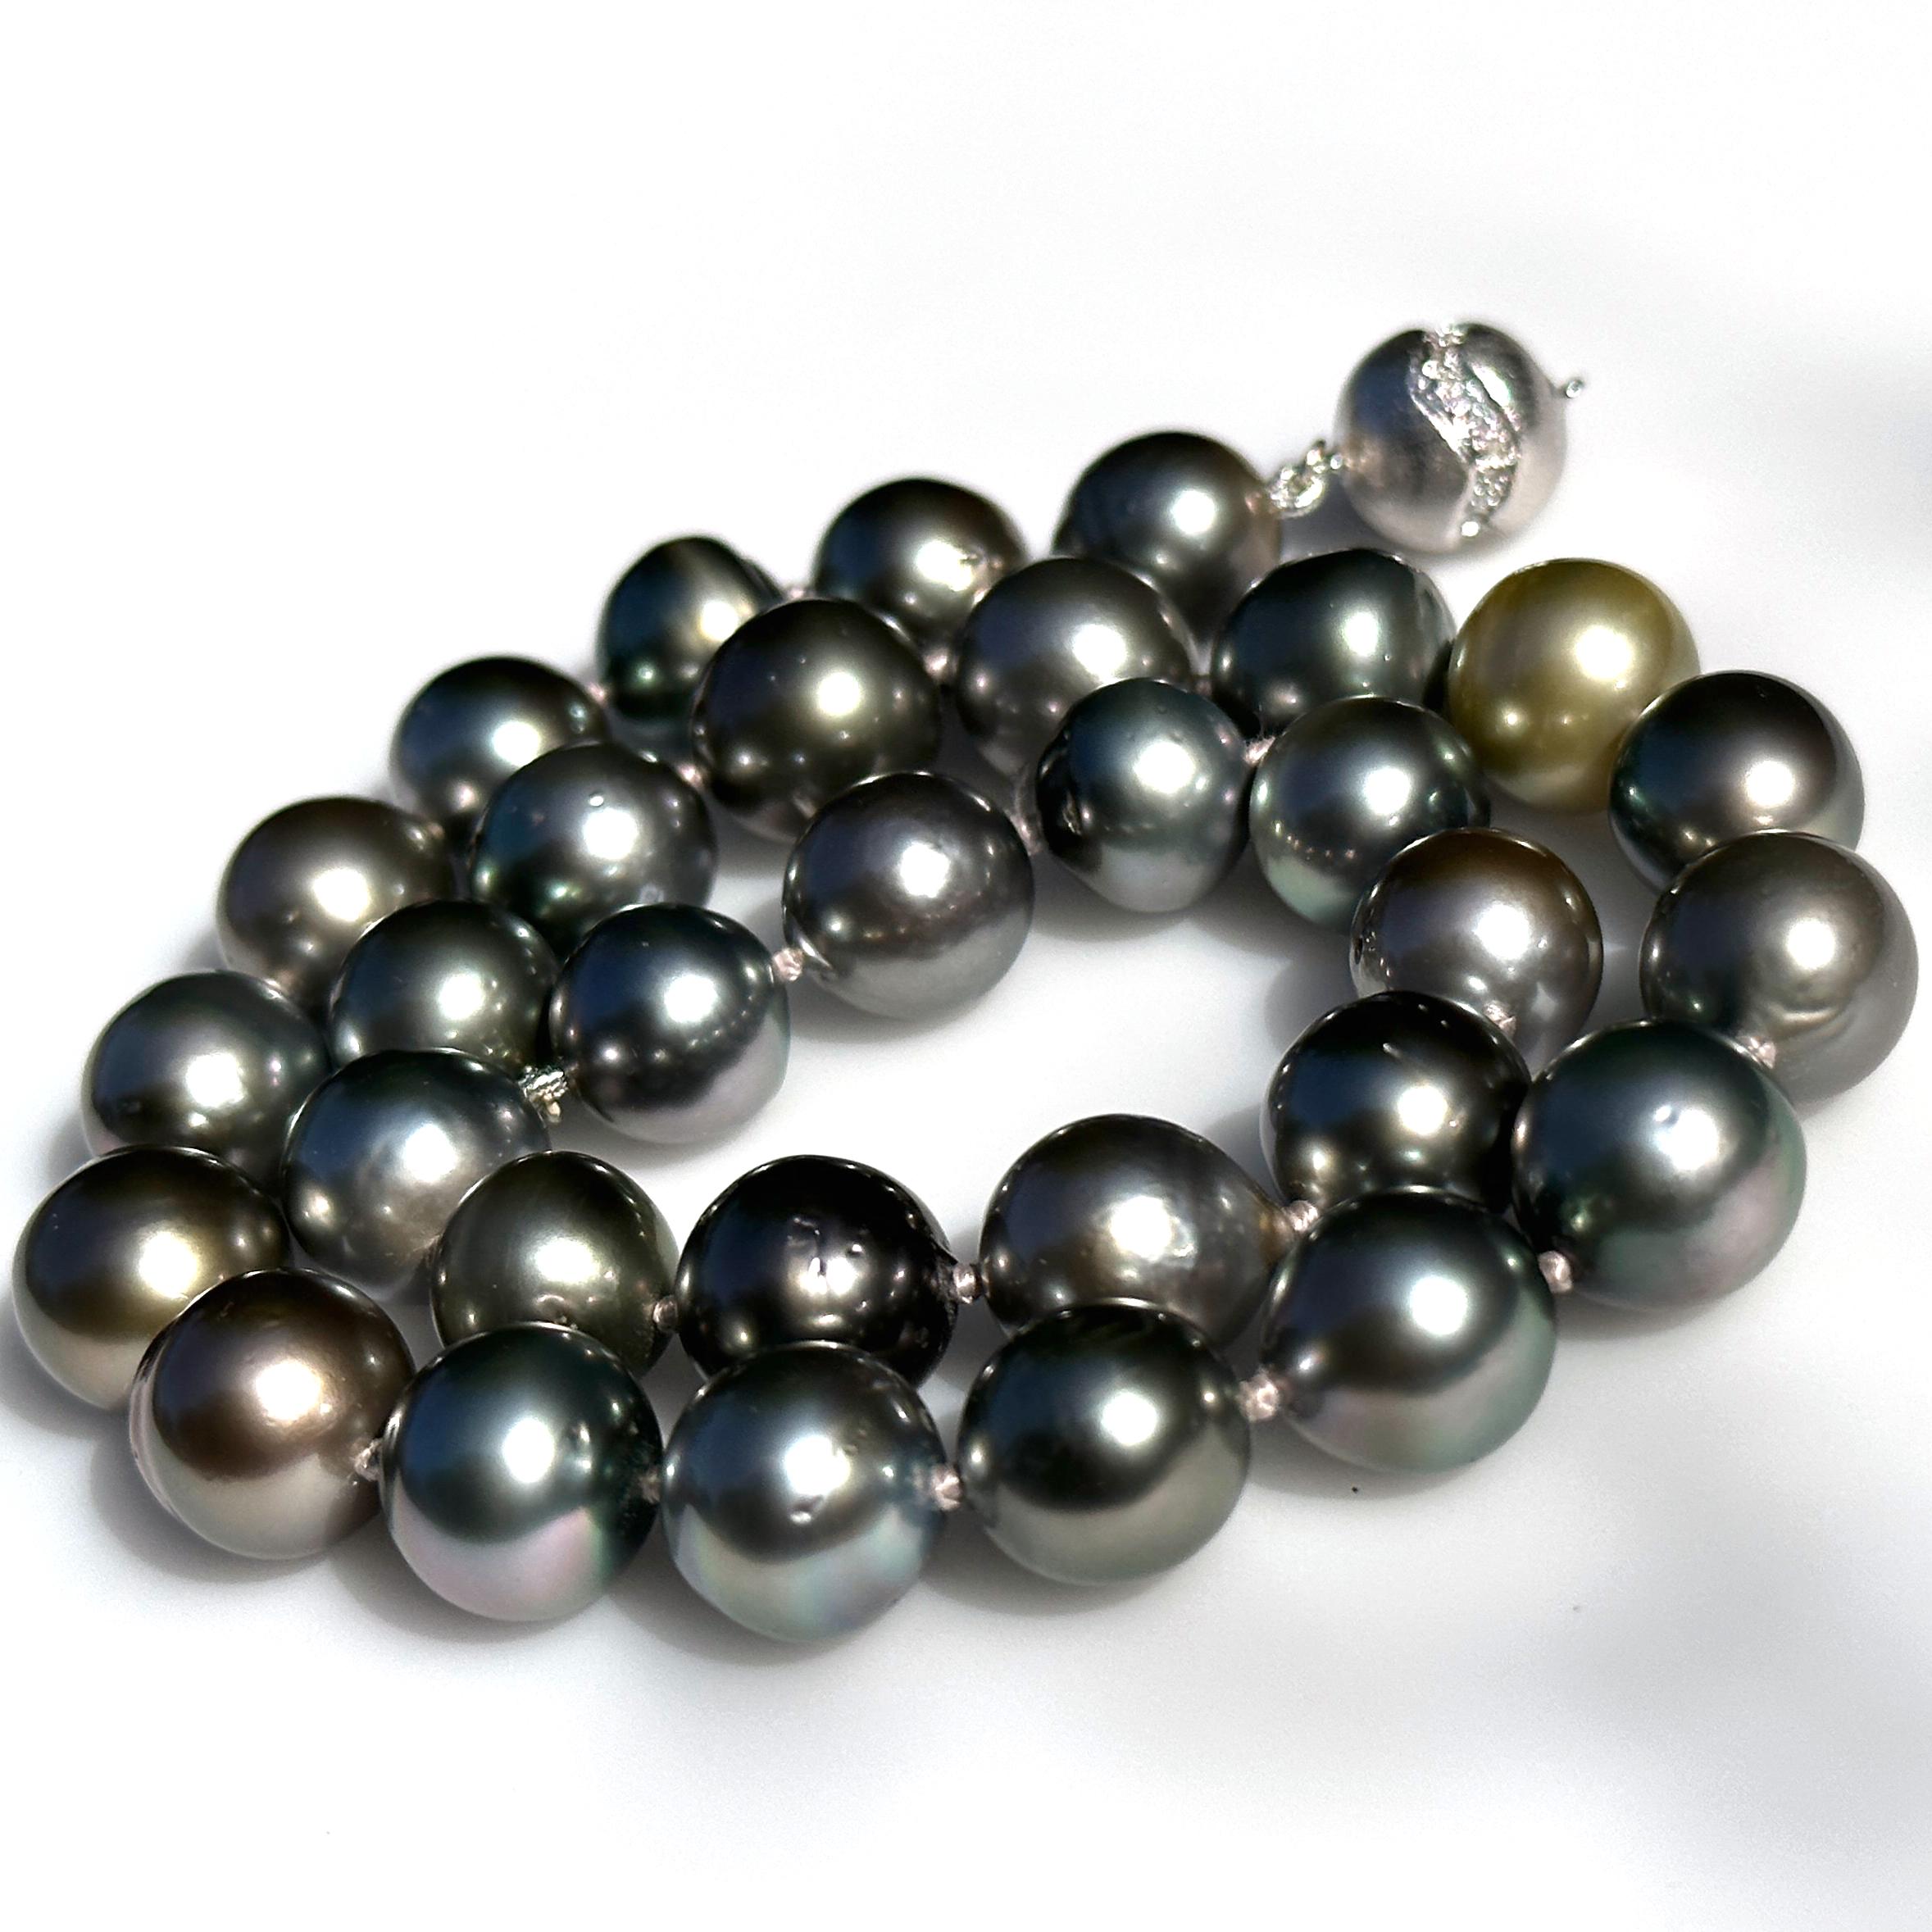 Choker-Length Strand of 11.5mm Tahitian Pearls w White Gold & Diamond Ball Clasp For Sale 2